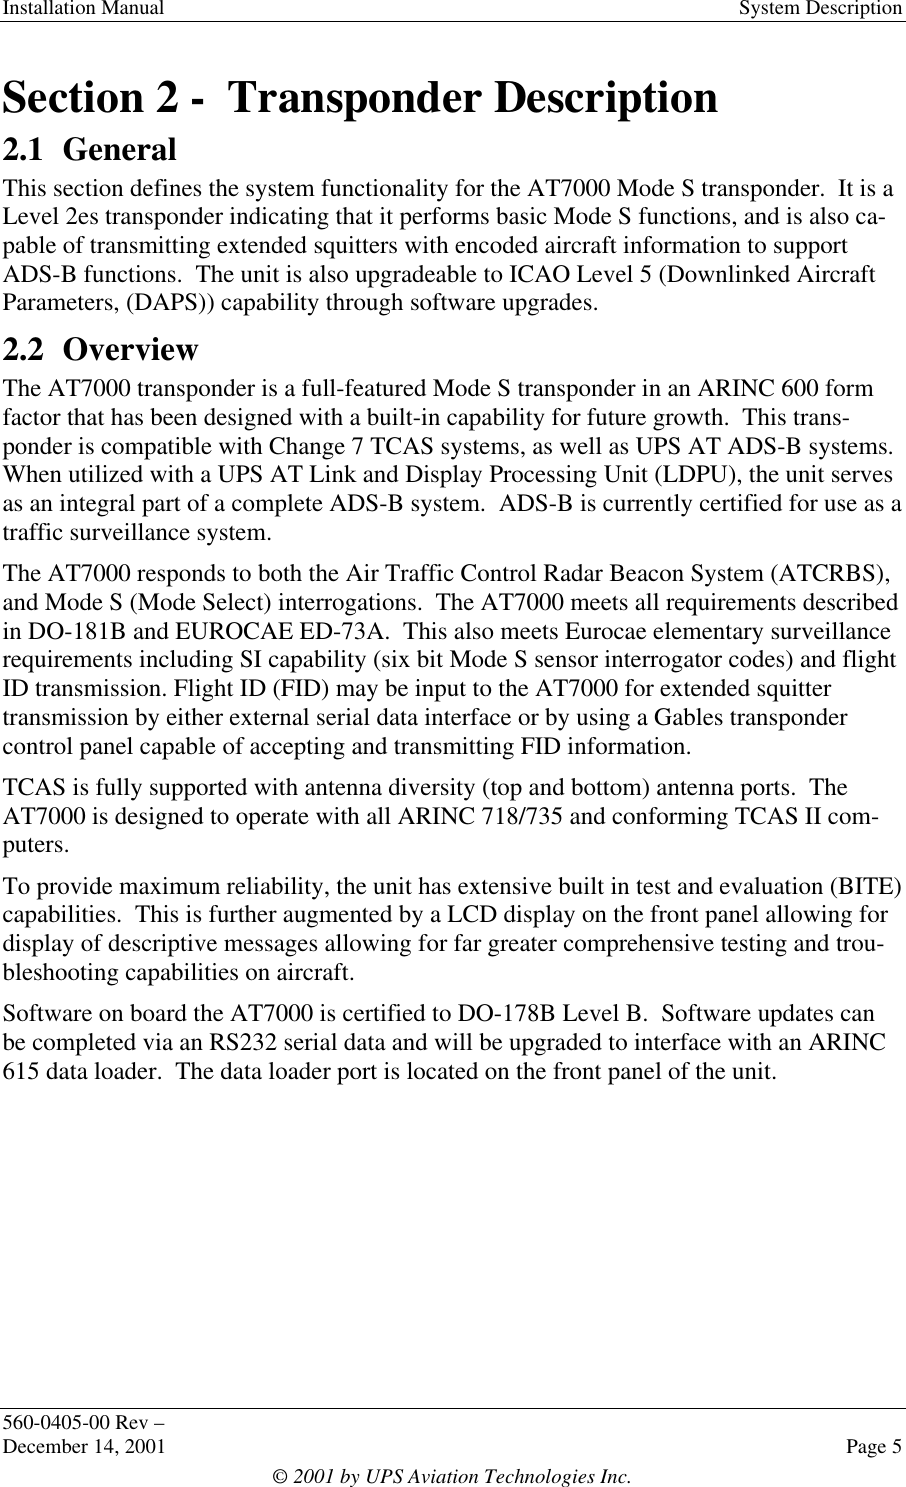 Installation Manual System Description560-0405-00 Rev –December 14, 2001 Page 5© 2001 by UPS Aviation Technologies Inc.Section 2 -  Transponder Description2.1 GeneralThis section defines the system functionality for the AT7000 Mode S transponder.  It is aLevel 2es transponder indicating that it performs basic Mode S functions, and is also ca-pable of transmitting extended squitters with encoded aircraft information to supportADS-B functions.  The unit is also upgradeable to ICAO Level 5 (Downlinked AircraftParameters, (DAPS)) capability through software upgrades.2.2 OverviewThe AT7000 transponder is a full-featured Mode S transponder in an ARINC 600 formfactor that has been designed with a built-in capability for future growth.  This trans-ponder is compatible with Change 7 TCAS systems, as well as UPS AT ADS-B systems.When utilized with a UPS AT Link and Display Processing Unit (LDPU), the unit servesas an integral part of a complete ADS-B system.  ADS-B is currently certified for use as atraffic surveillance system.The AT7000 responds to both the Air Traffic Control Radar Beacon System (ATCRBS),and Mode S (Mode Select) interrogations.  The AT7000 meets all requirements describedin DO-181B and EUROCAE ED-73A.  This also meets Eurocae elementary surveillancerequirements including SI capability (six bit Mode S sensor interrogator codes) and flightID transmission. Flight ID (FID) may be input to the AT7000 for extended squittertransmission by either external serial data interface or by using a Gables transpondercontrol panel capable of accepting and transmitting FID information.TCAS is fully supported with antenna diversity (top and bottom) antenna ports.  TheAT7000 is designed to operate with all ARINC 718/735 and conforming TCAS II com-puters.To provide maximum reliability, the unit has extensive built in test and evaluation (BITE)capabilities.  This is further augmented by a LCD display on the front panel allowing fordisplay of descriptive messages allowing for far greater comprehensive testing and trou-bleshooting capabilities on aircraft.Software on board the AT7000 is certified to DO-178B Level B.  Software updates canbe completed via an RS232 serial data and will be upgraded to interface with an ARINC615 data loader.  The data loader port is located on the front panel of the unit.